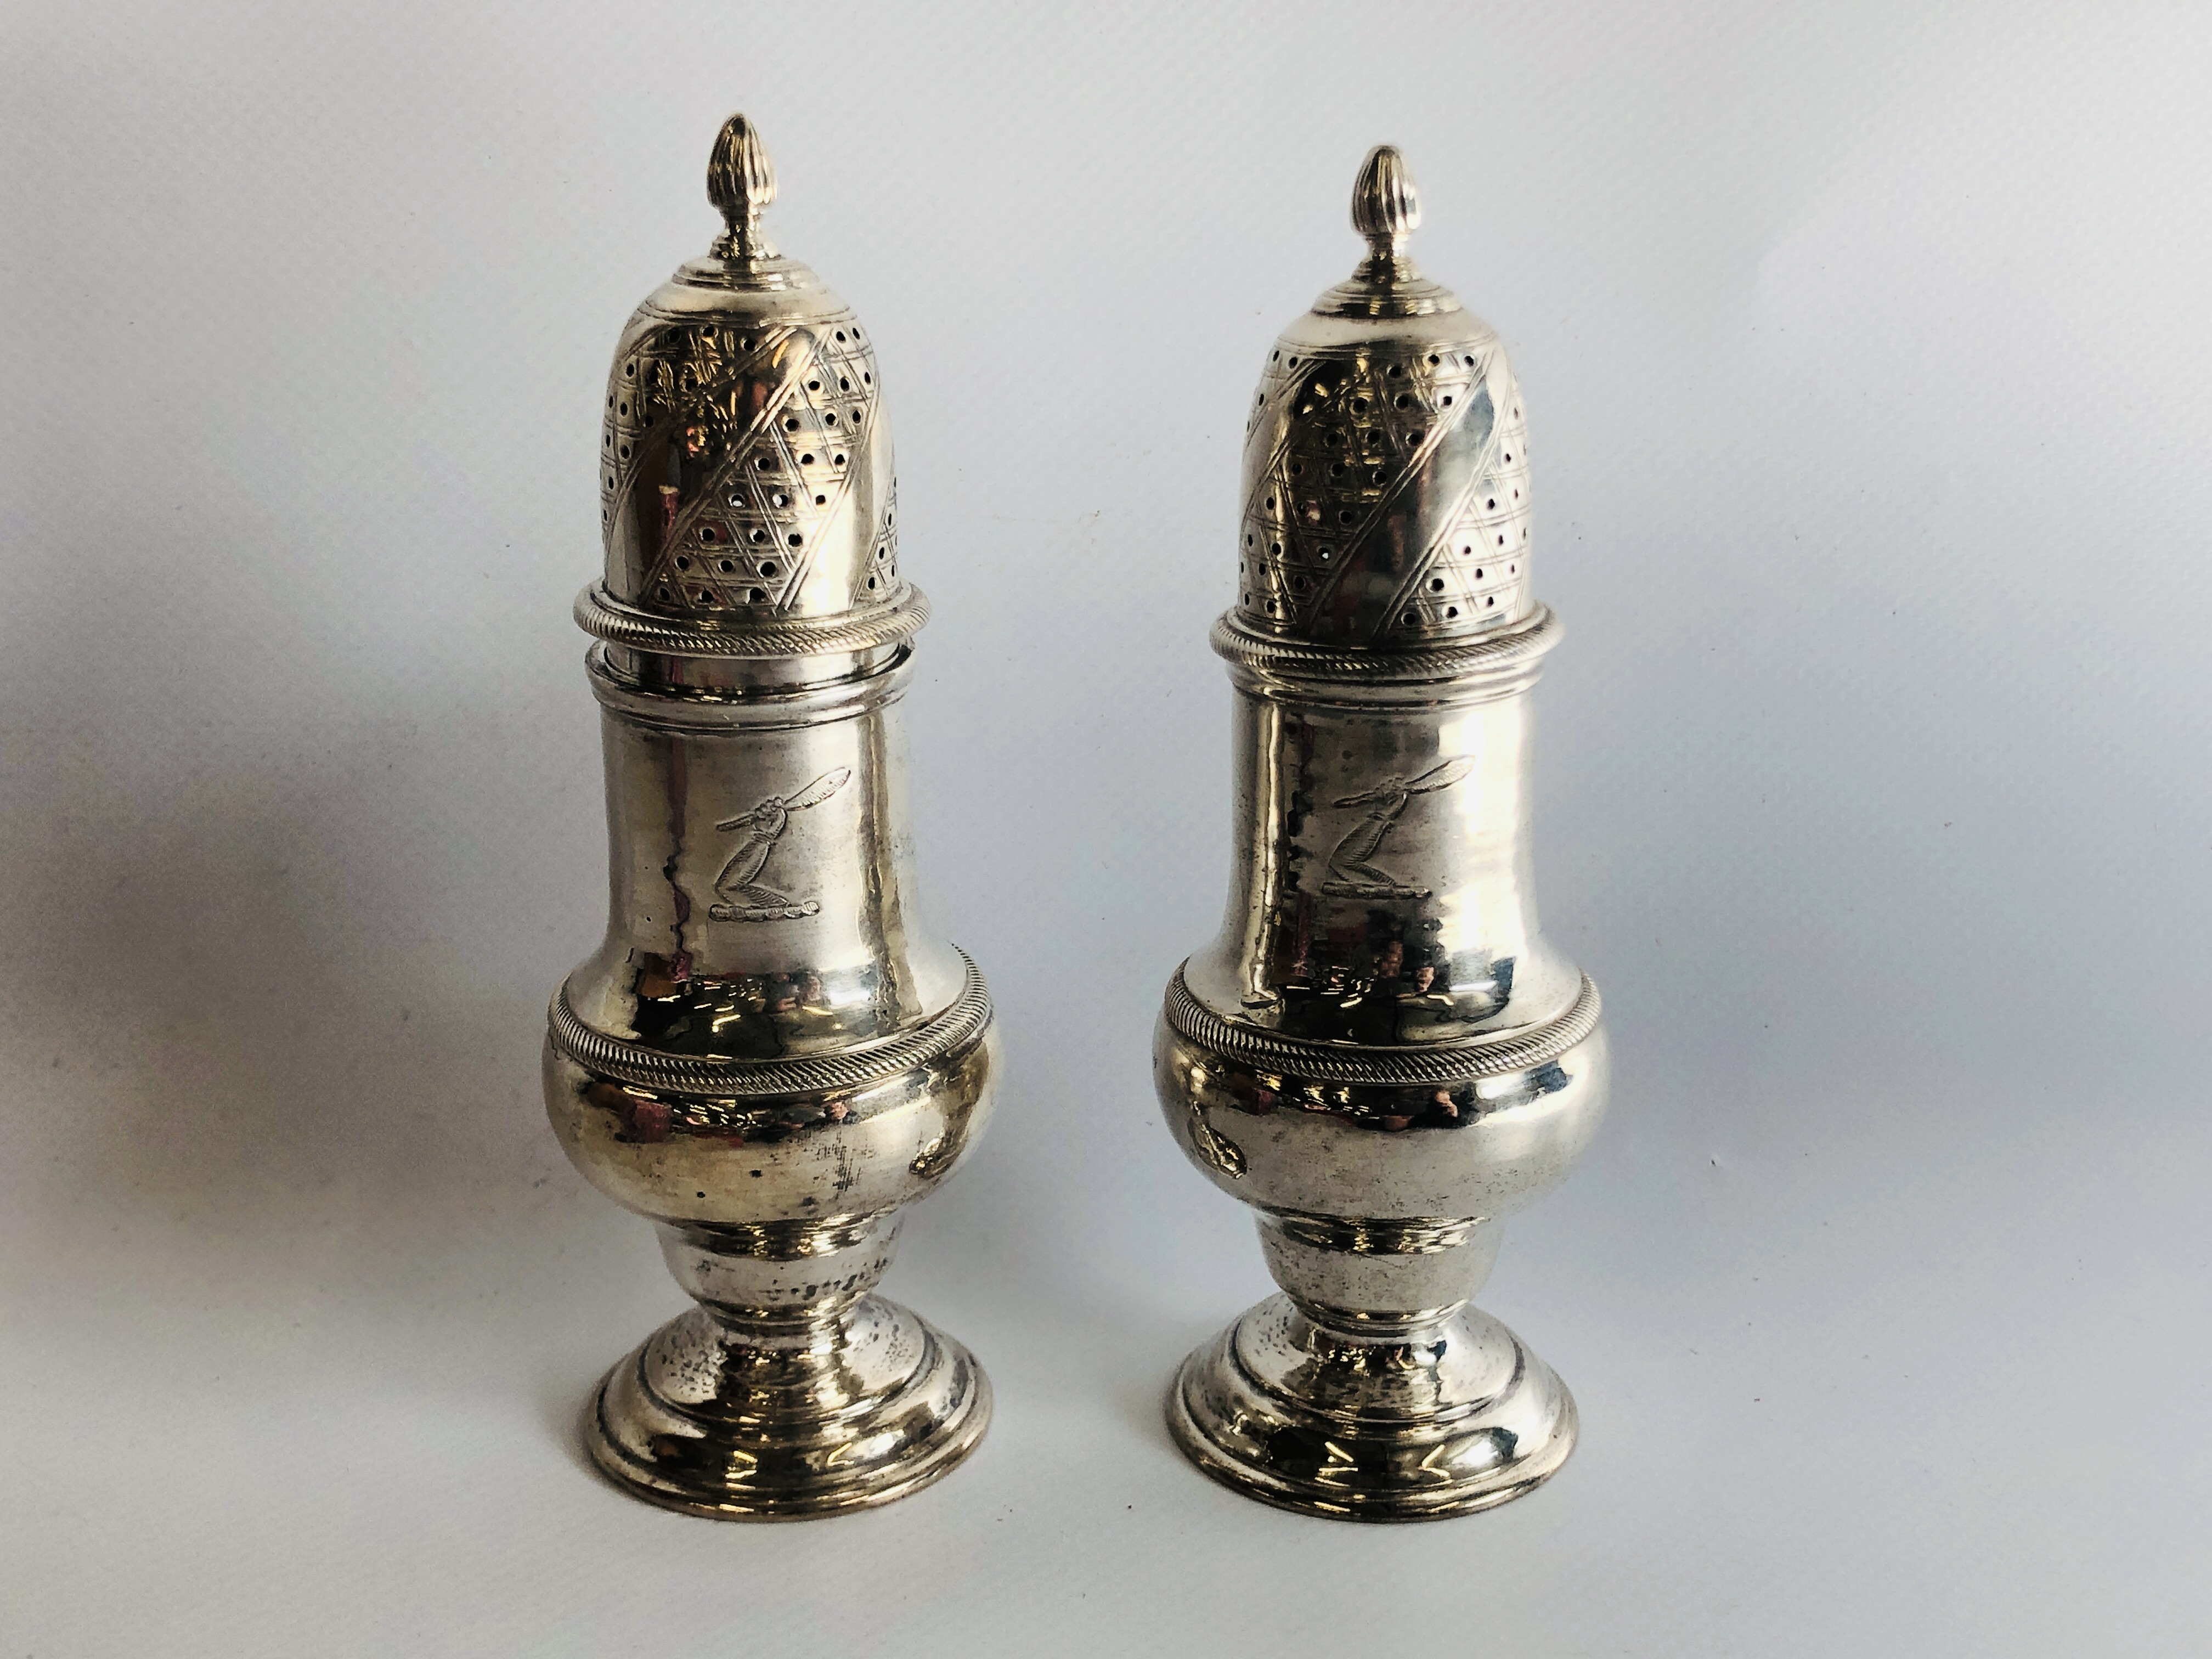 A PAIR OF GOOD QUALITY SILVER SIFTERS HEIGHT 13.5CM.